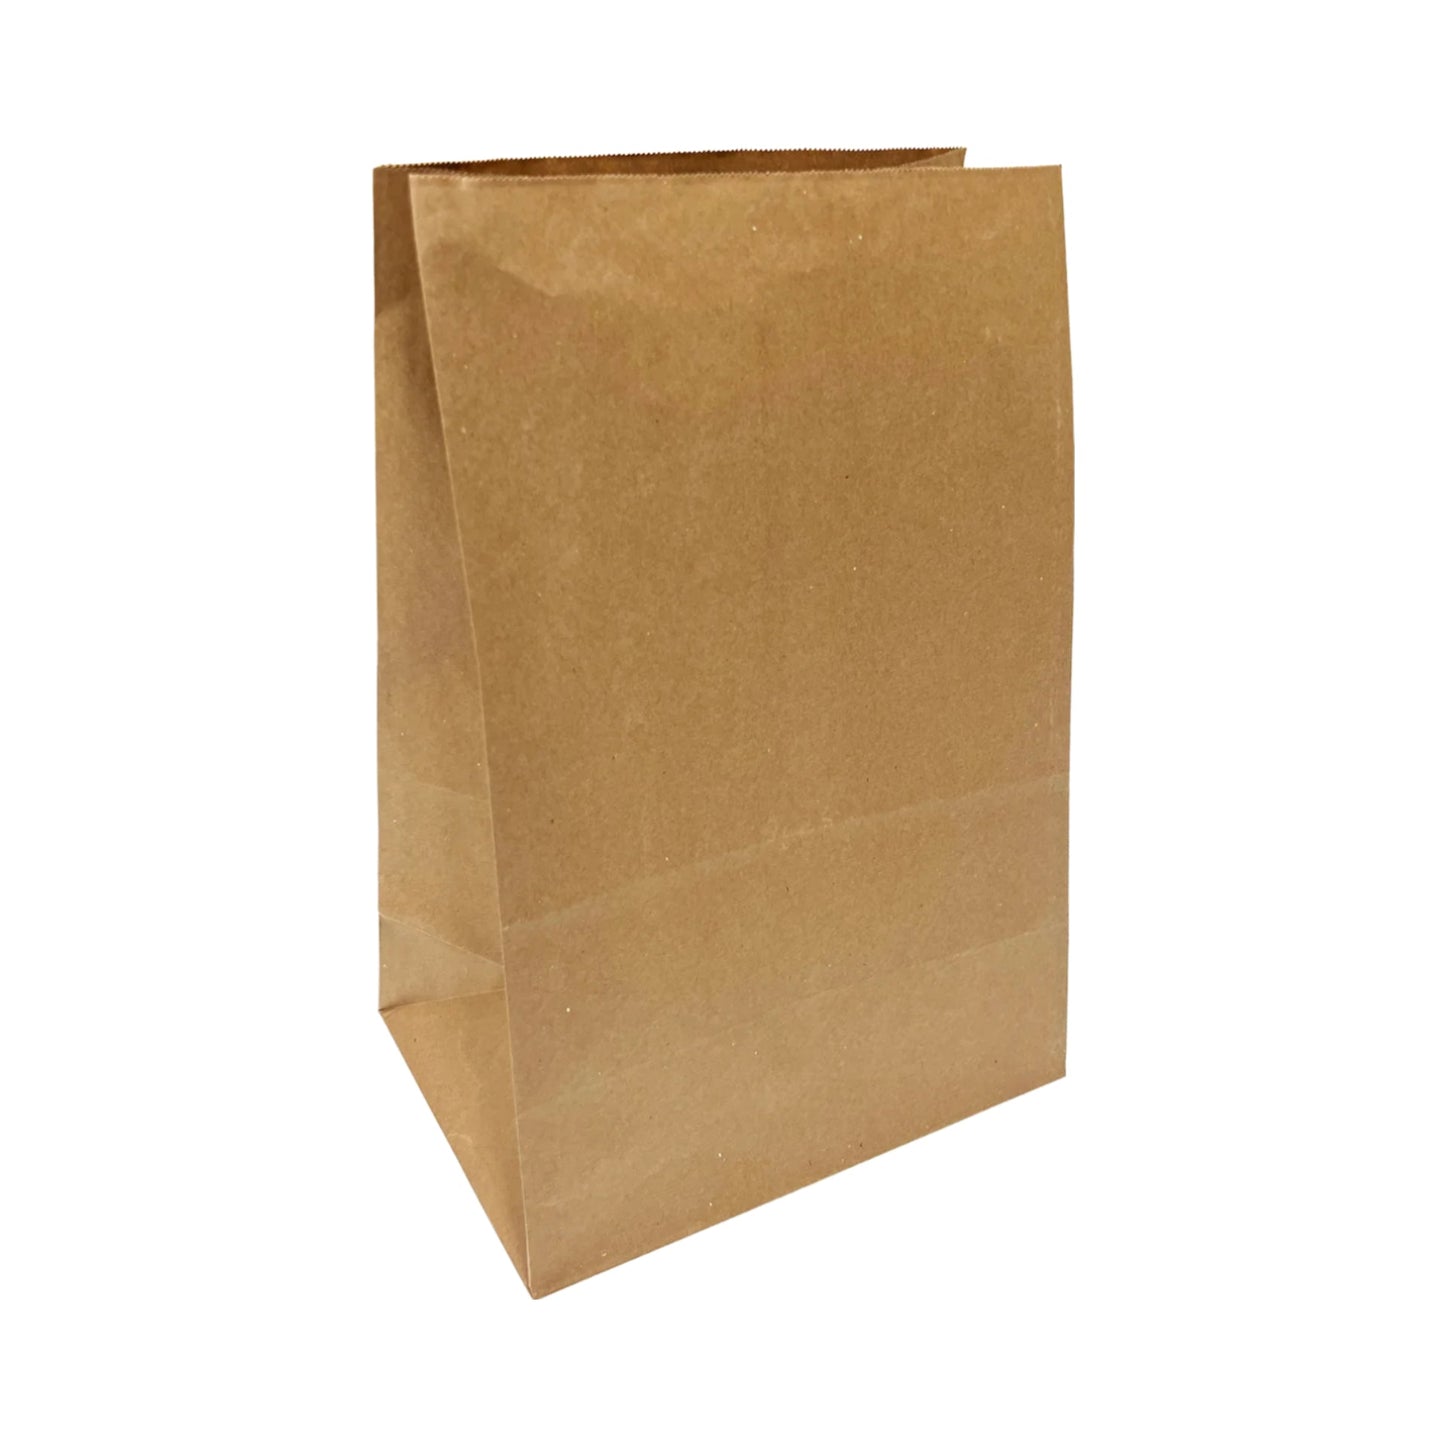 300pcs DD65 Grocery Bags 12x7x17 inches; $0.09/pc